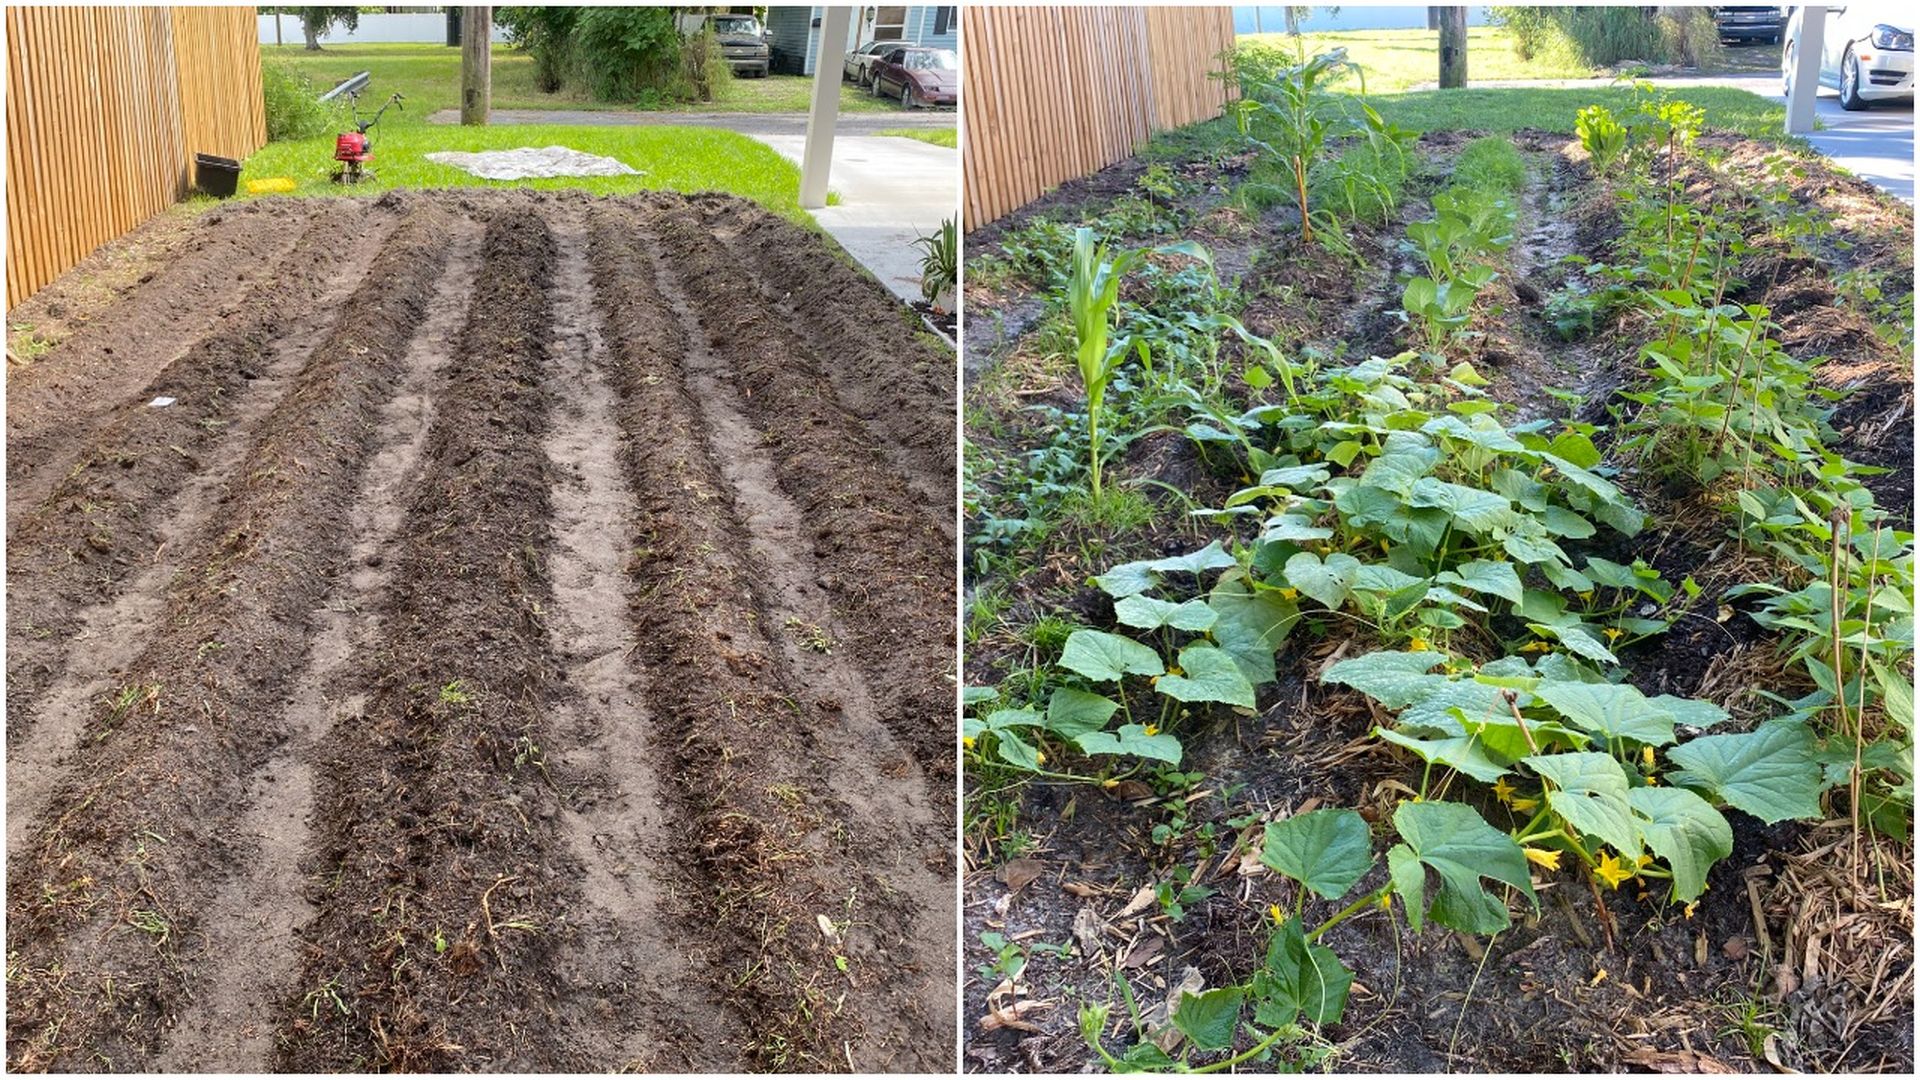 Scenes from Ben's garden, before and after.